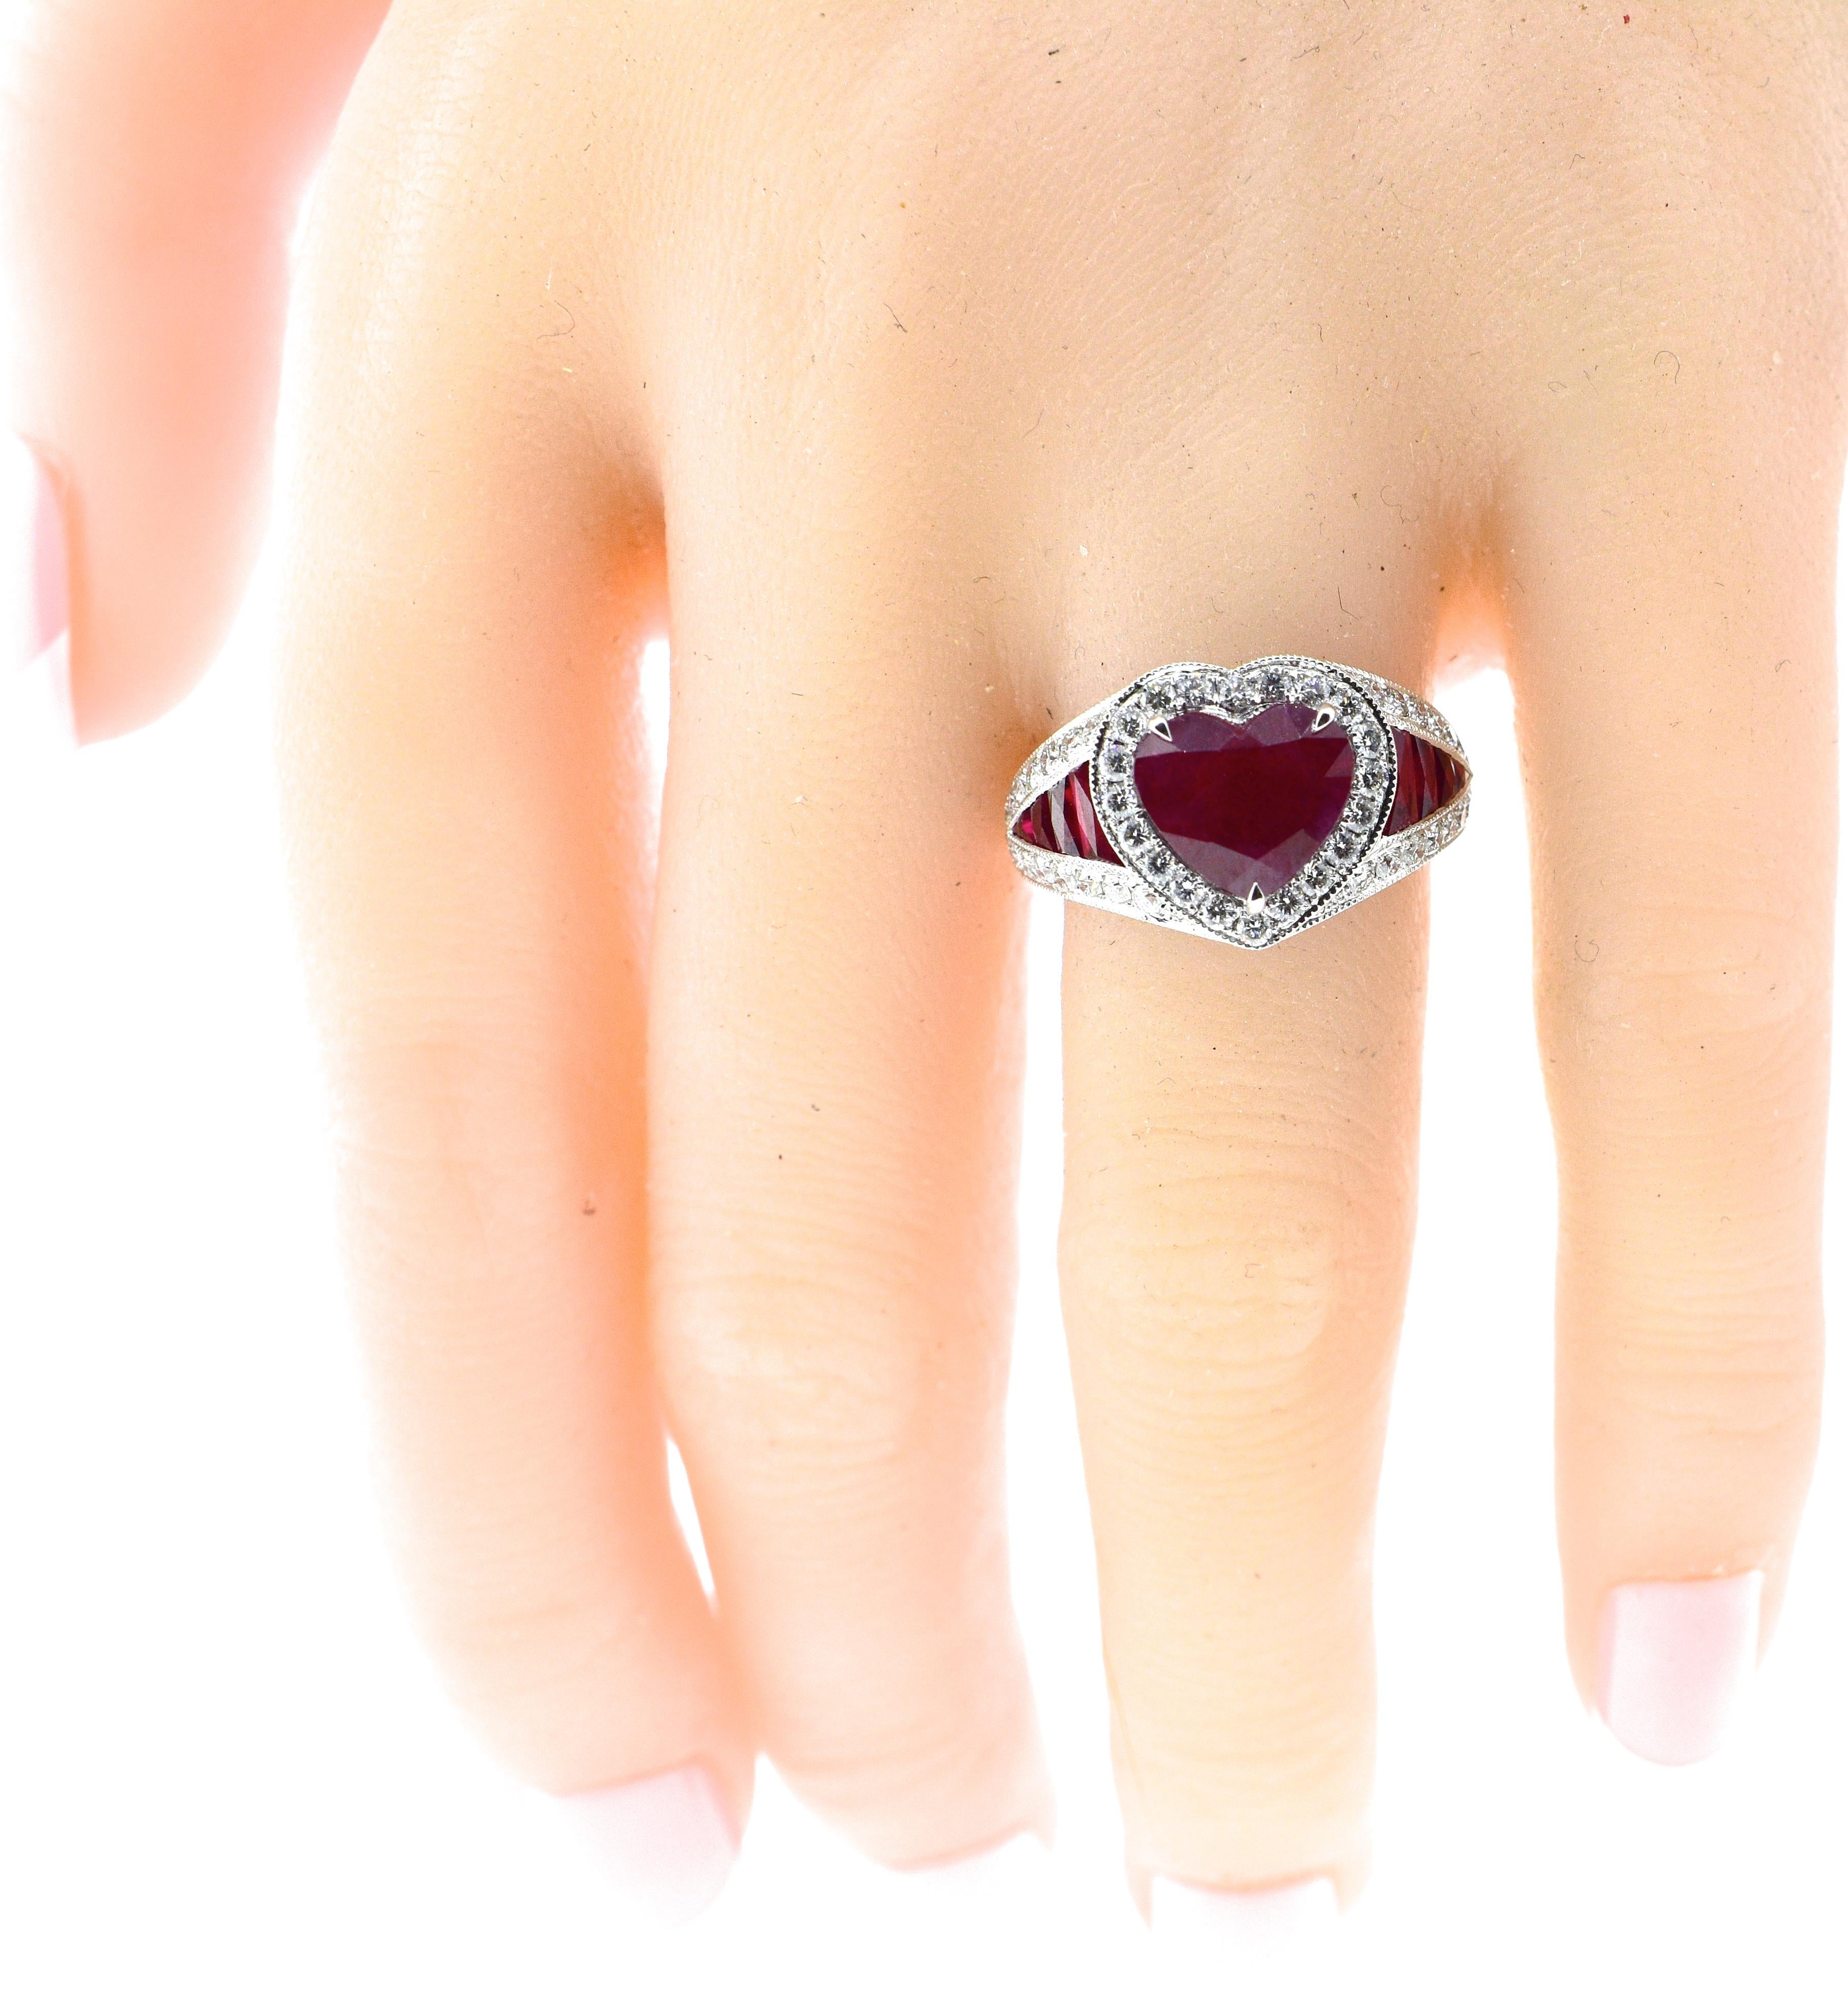 Contemporary Platinum, Diamond and Natural Heart Shaped Ruby Ring